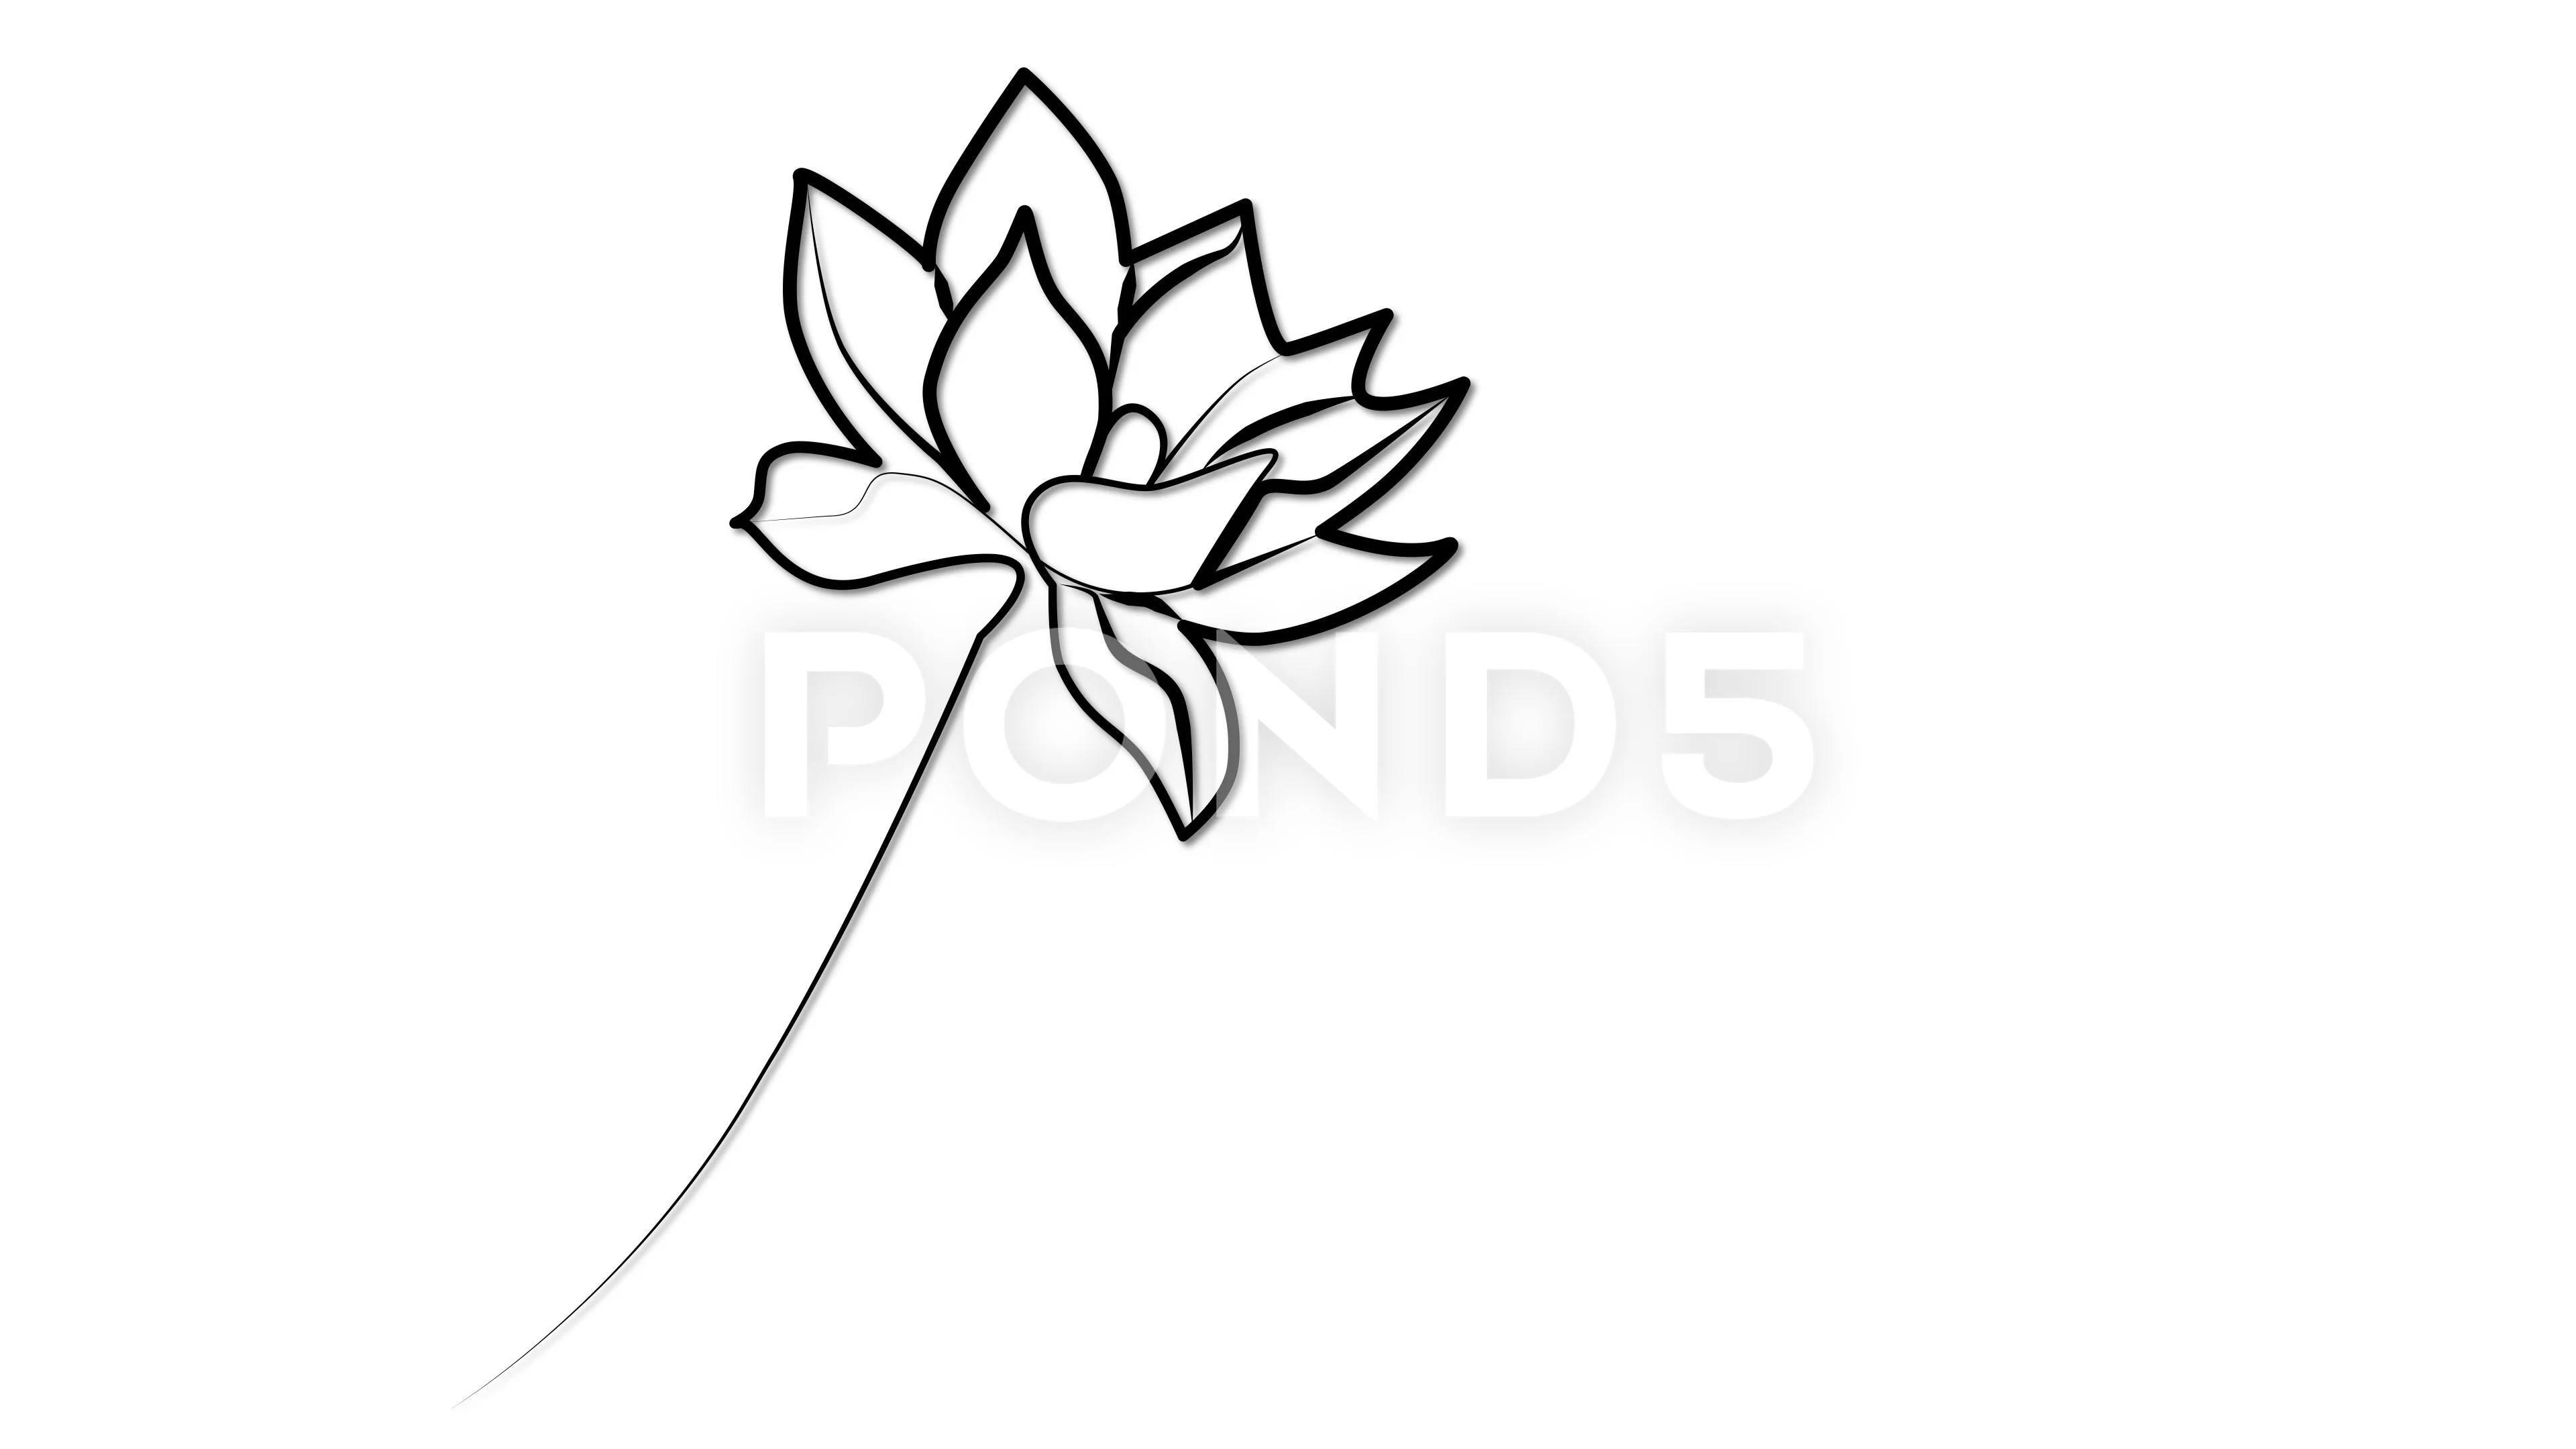 One Continuous Line Drawing Of Beauty Fresh Lotus For Spa Business Logo.  Printable Poster Decorative Garden Water Lily Flower Concept For Wall Home  Decor. Single Line Draw Design Vector Illustration Royalty Free